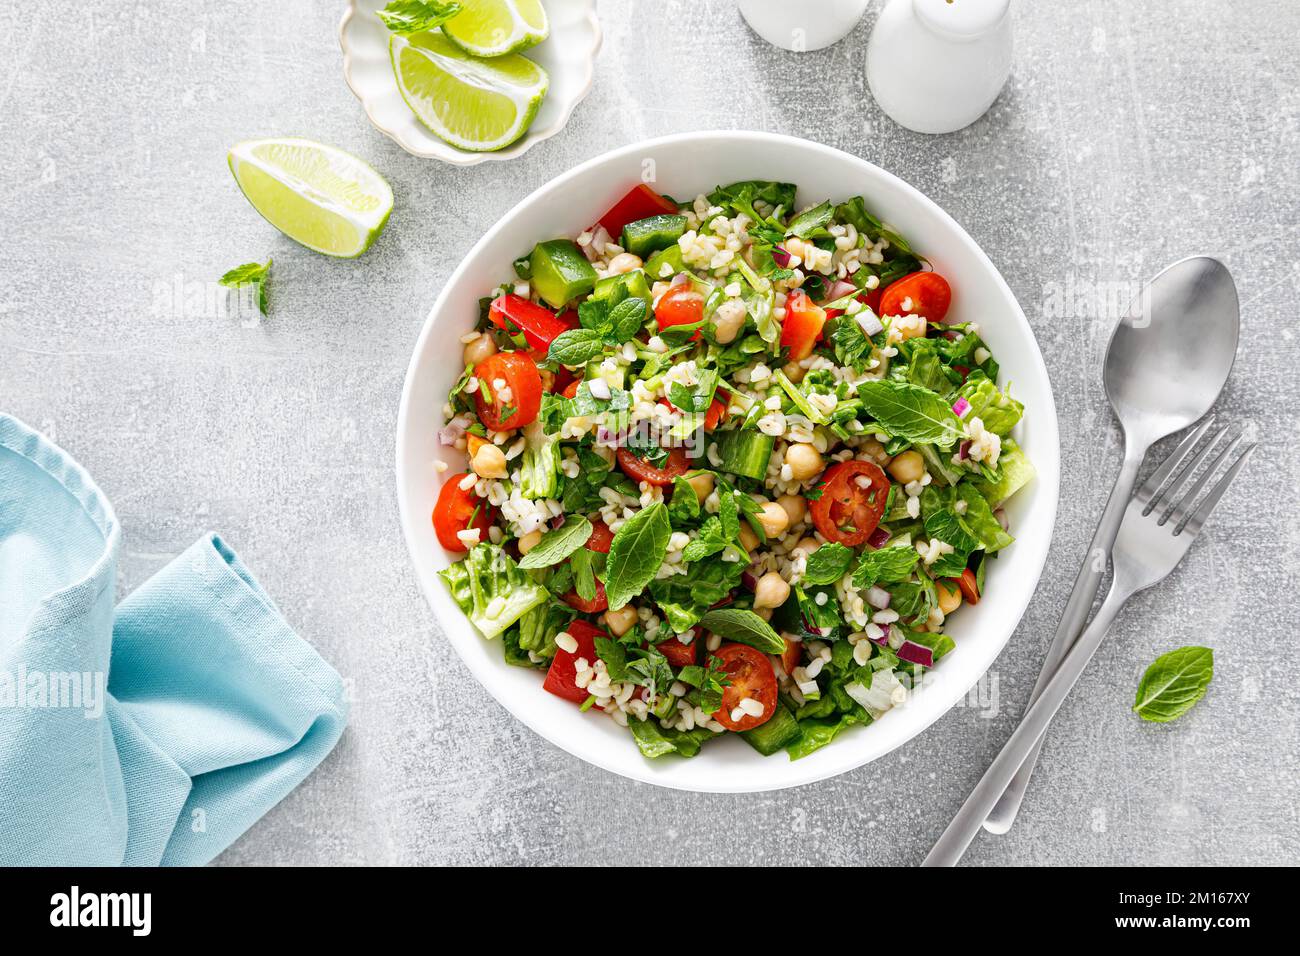 Tabbouleh salad. Tabouli salad with fresh parsley, onions, tomatoes, bulgur and chickpea. Healthy vegetarian food, mediterranean diet. Top view Stock Photo